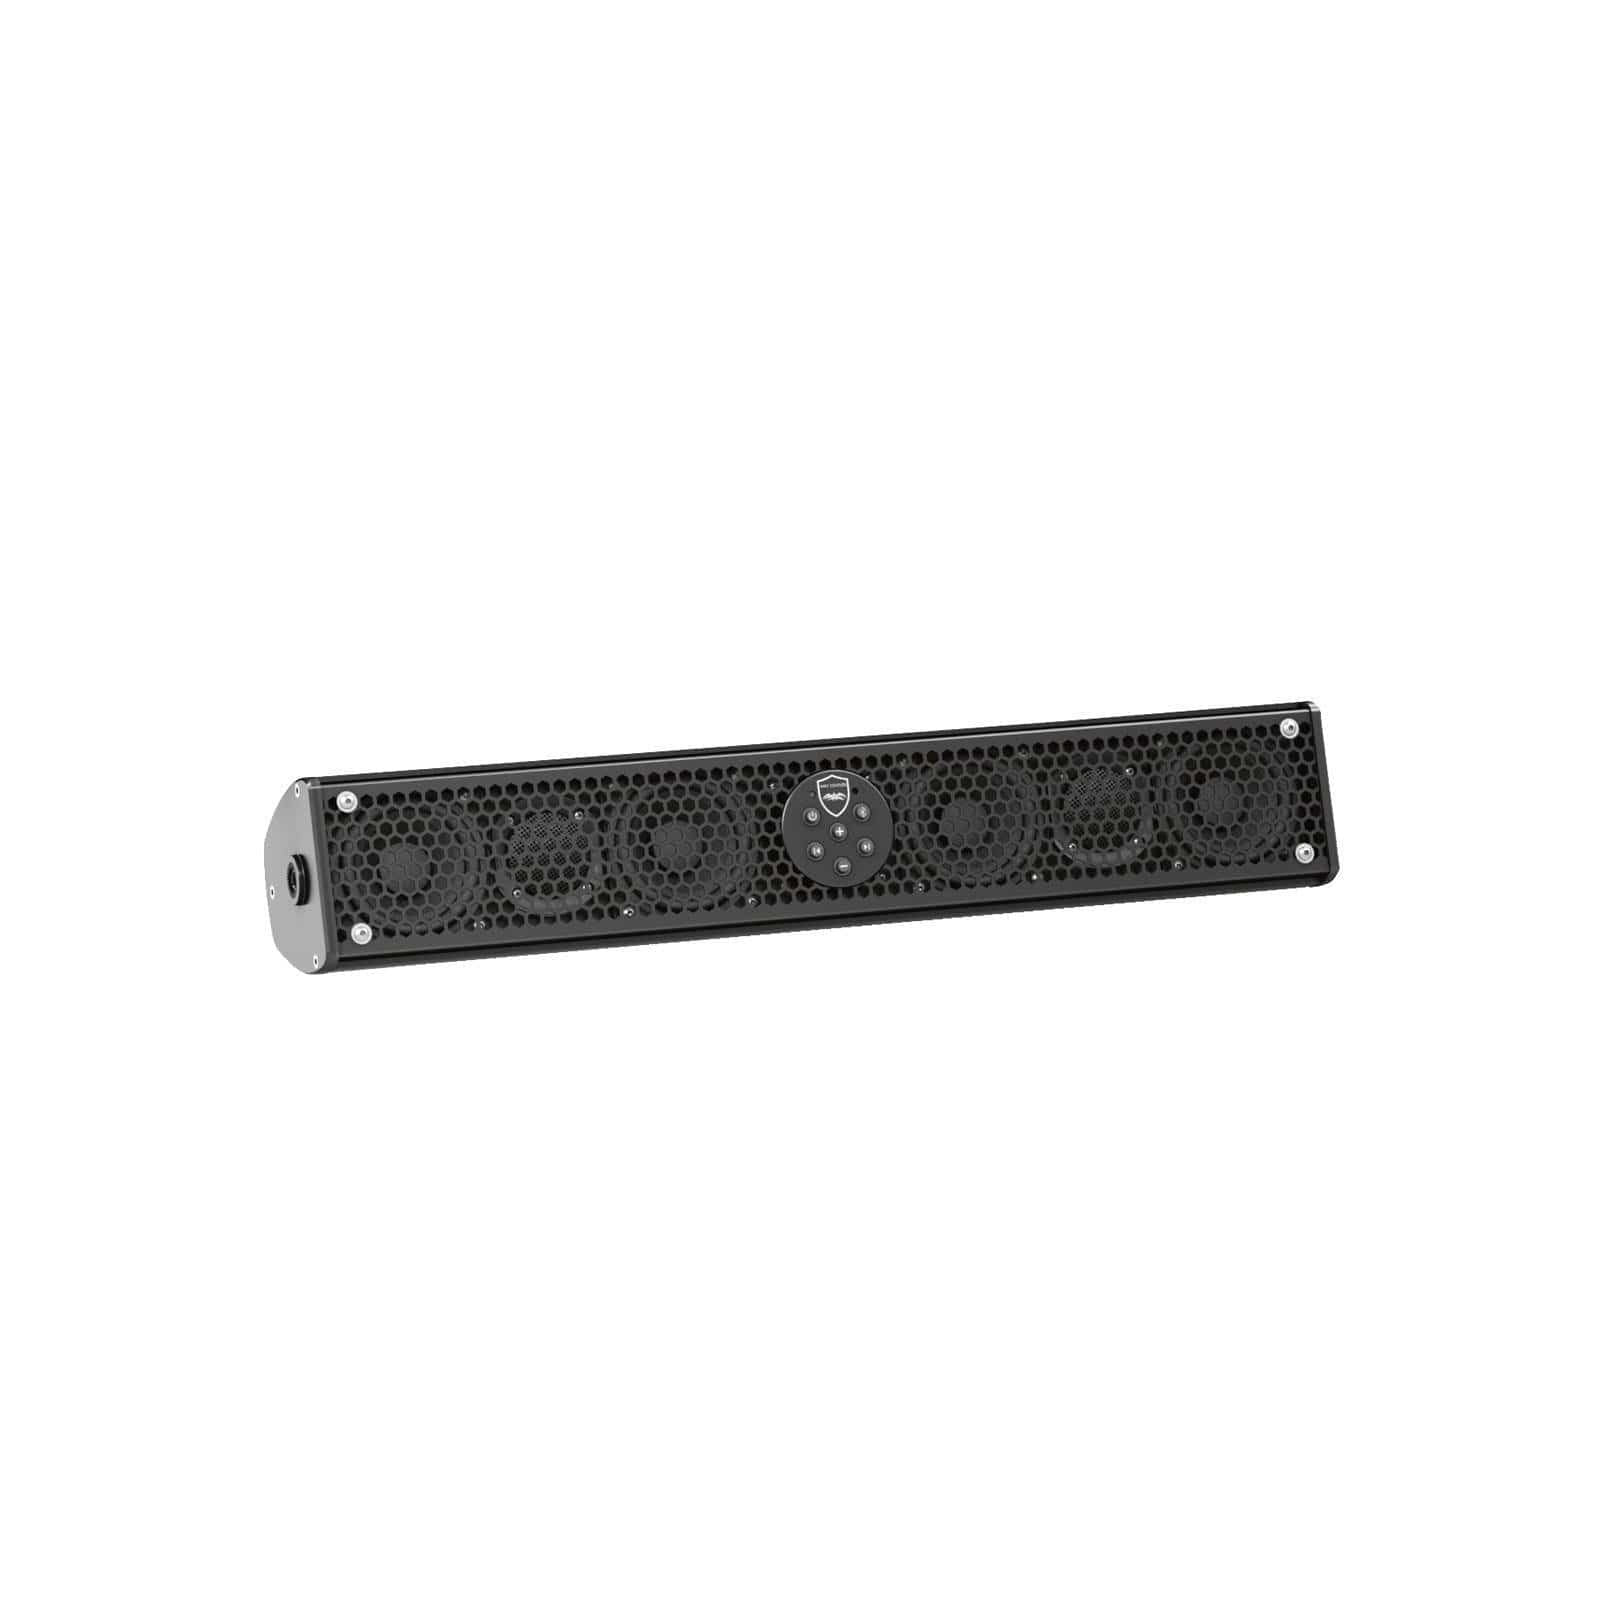 Wet Sounds Stealth 6 Ultra HD Can-Am Edition Sound Bar